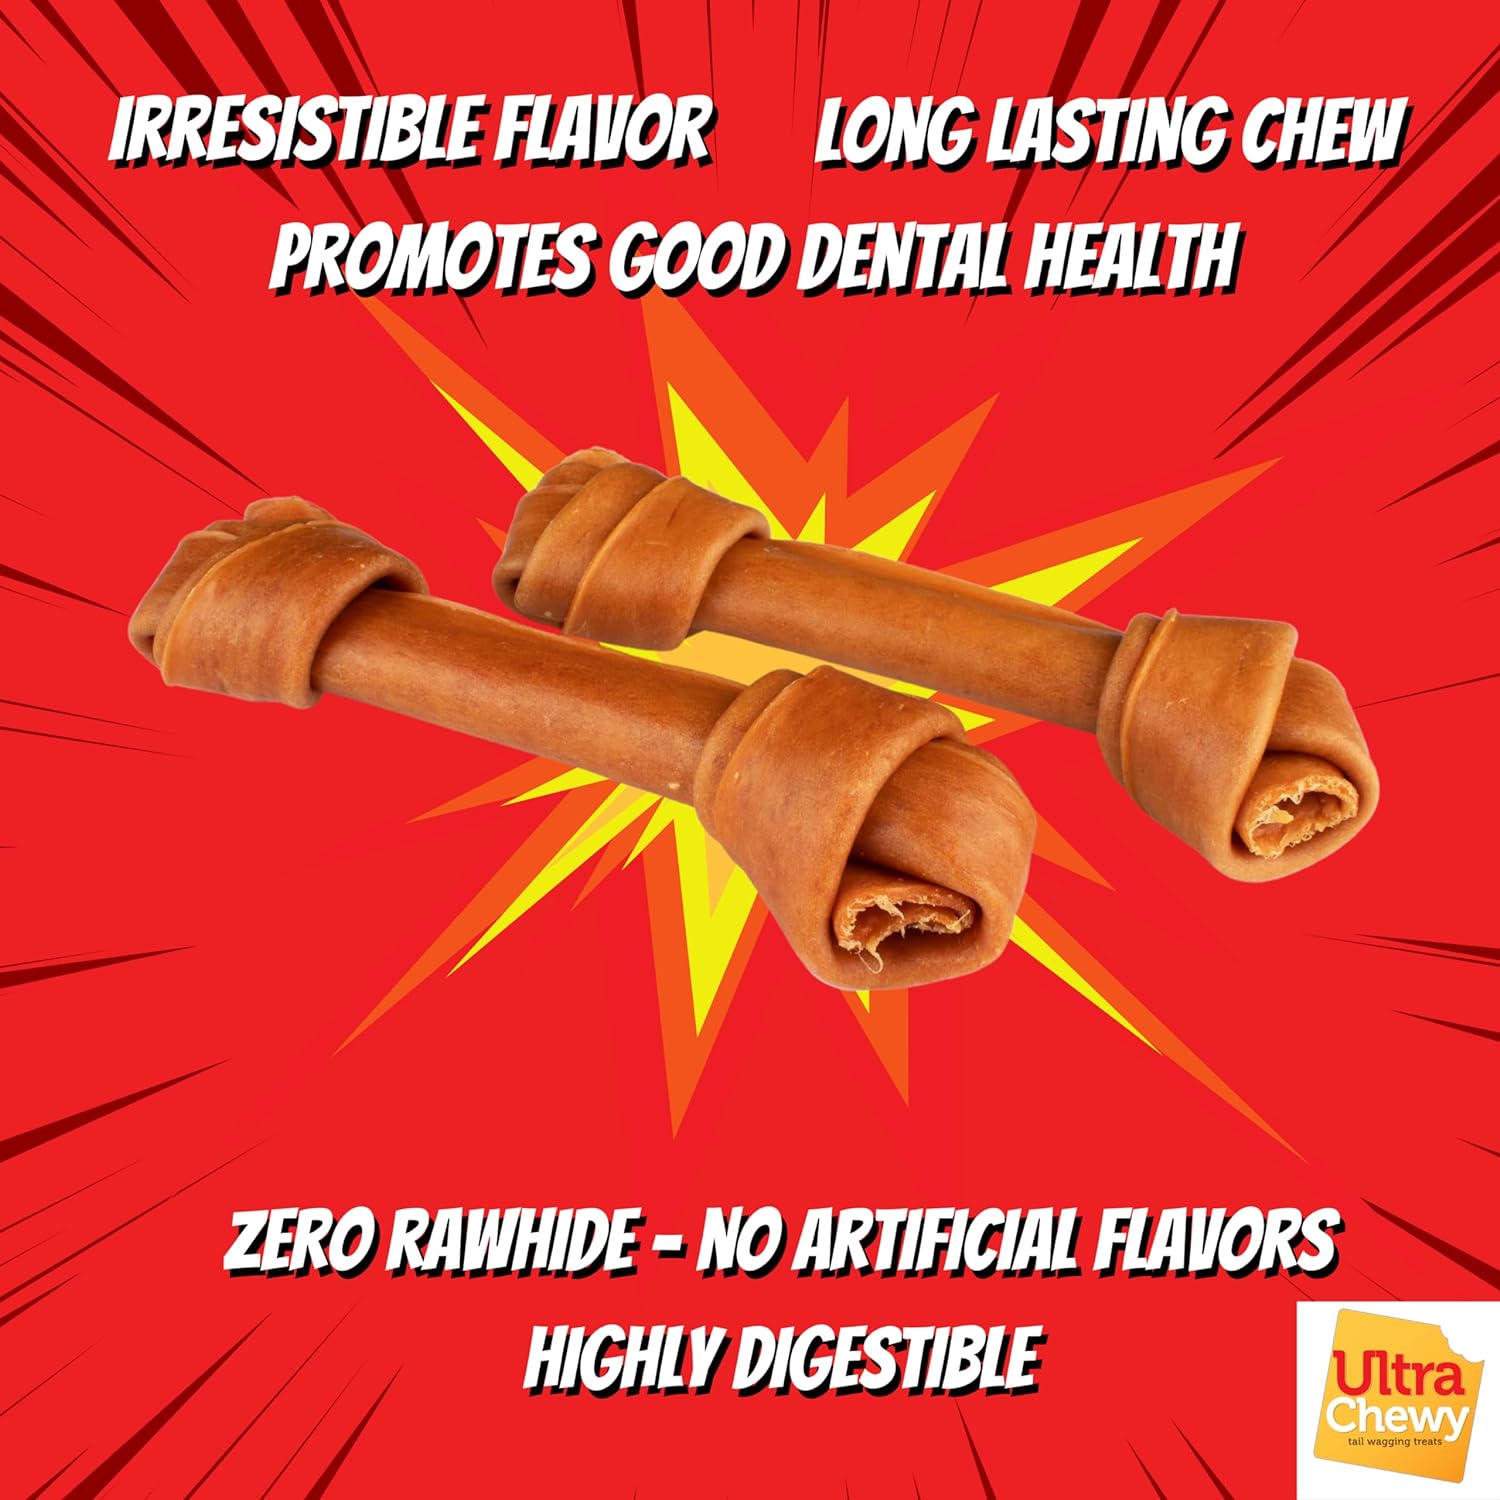 Ultra Chewy Turkey Tendon Knotted Bones for Dogs - Premium All-Natural, Hypoallergenic, Long-Lasting Dog Chew Treat, Easy to Digest, Ingredient Sourced from USA (5 Inches - 3 Pack) : Pet Supplies